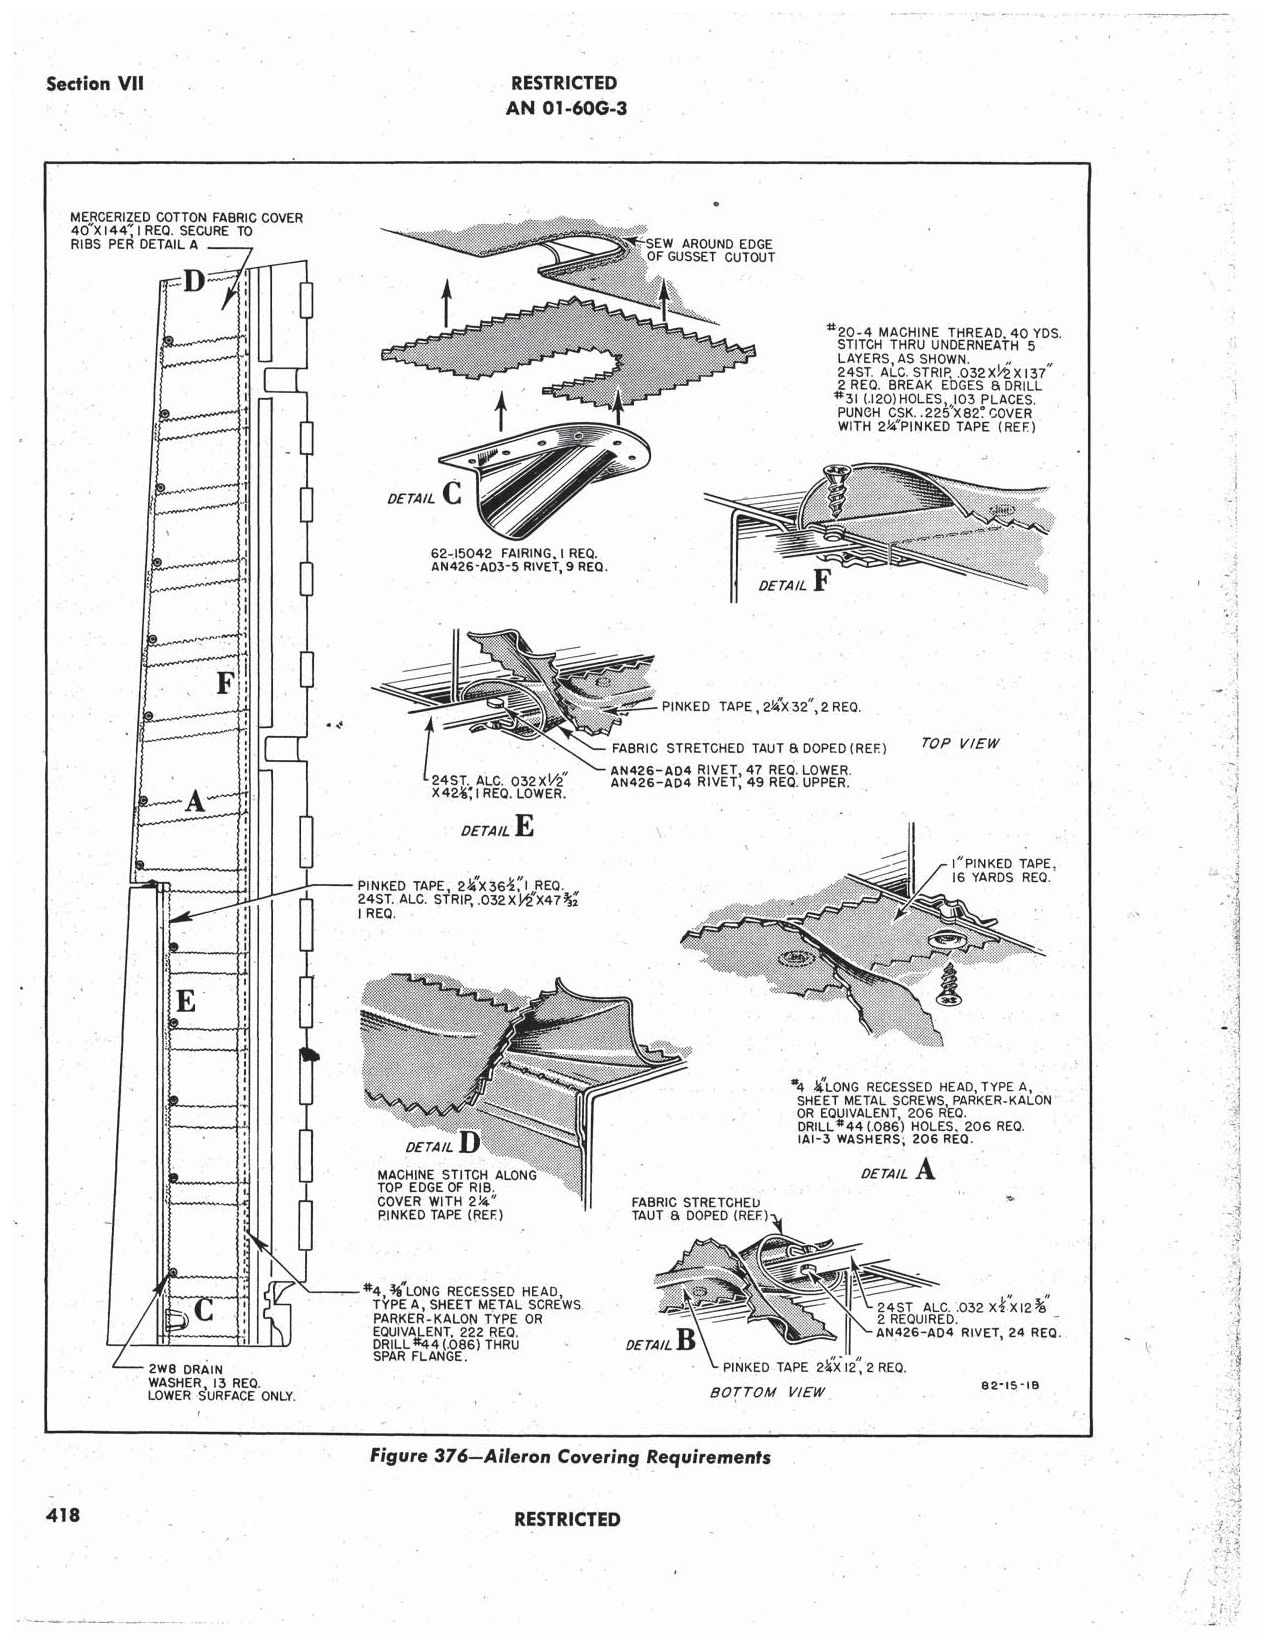 Sample page 451 from AirCorps Library document: Structural Repair Instructions - B-25